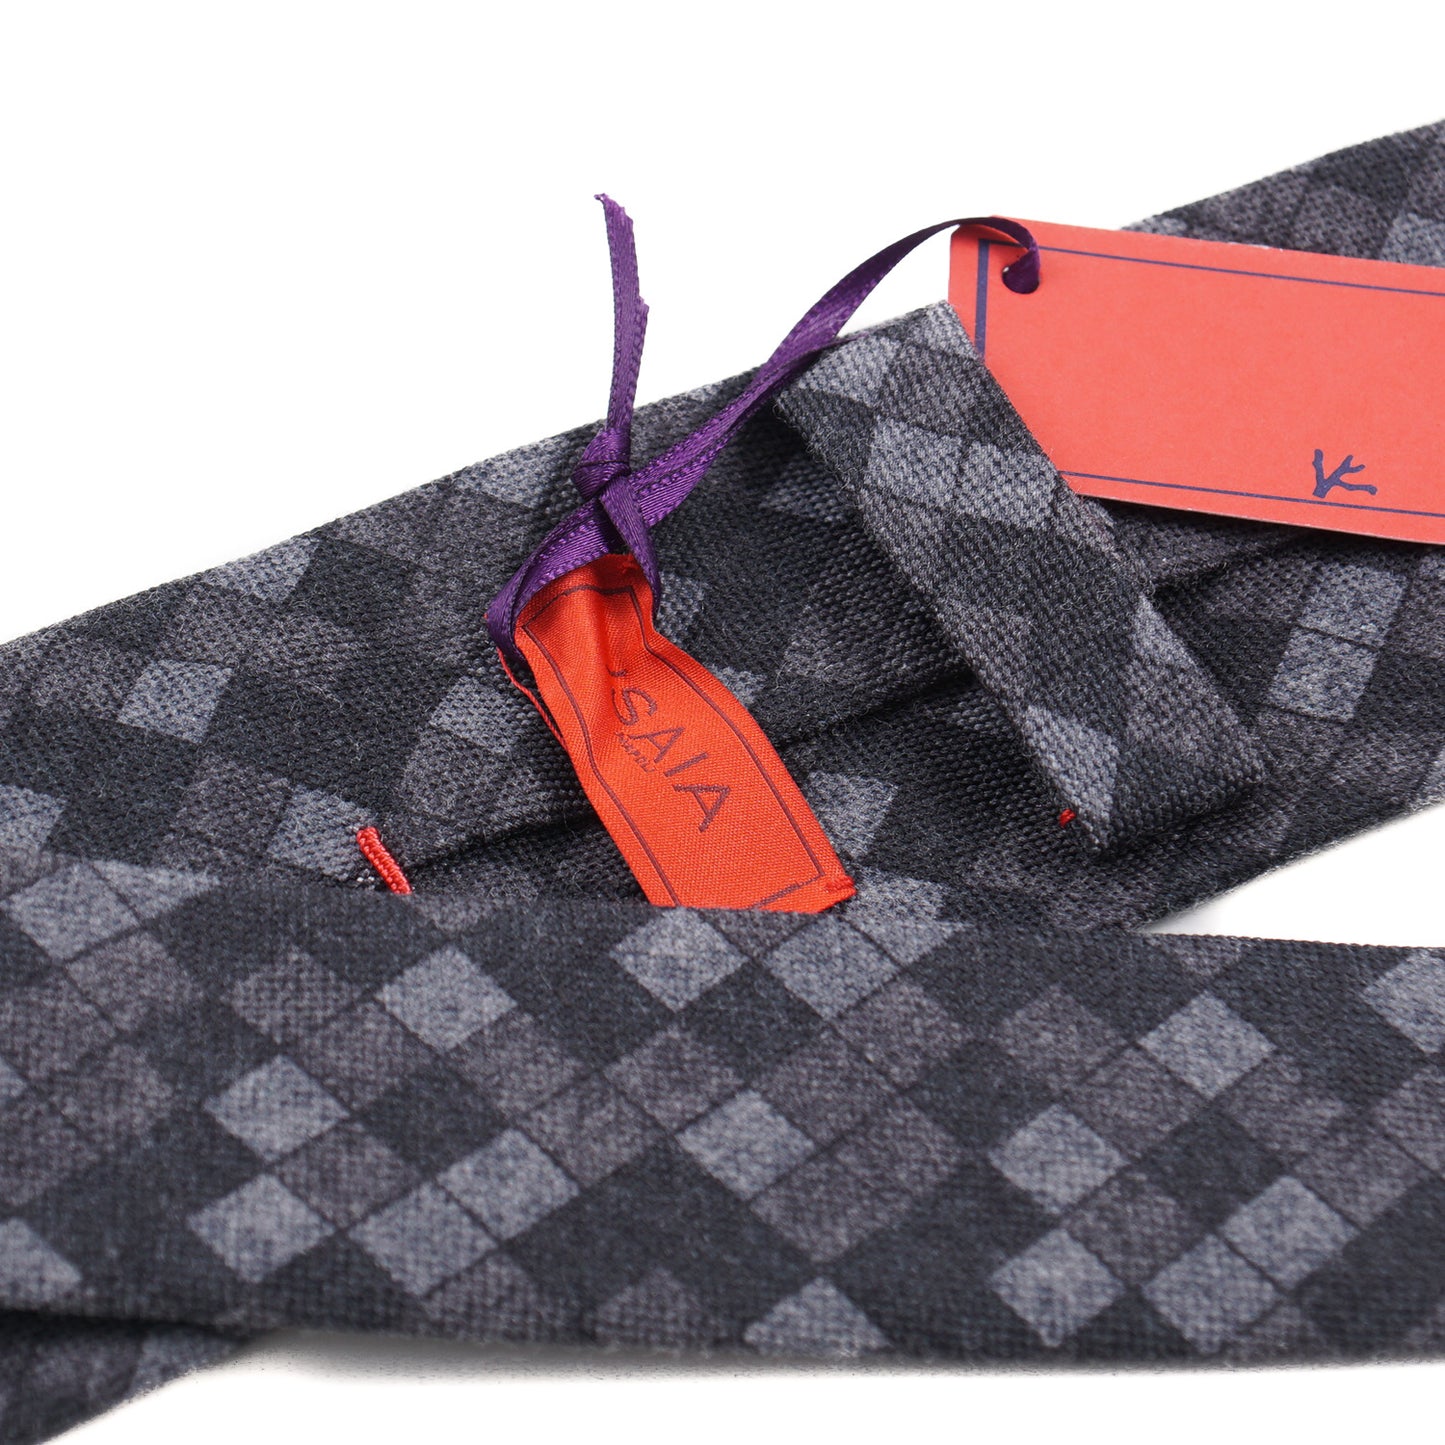 Isaia Check Print Wool and Silk Tie - Top Shelf Apparel